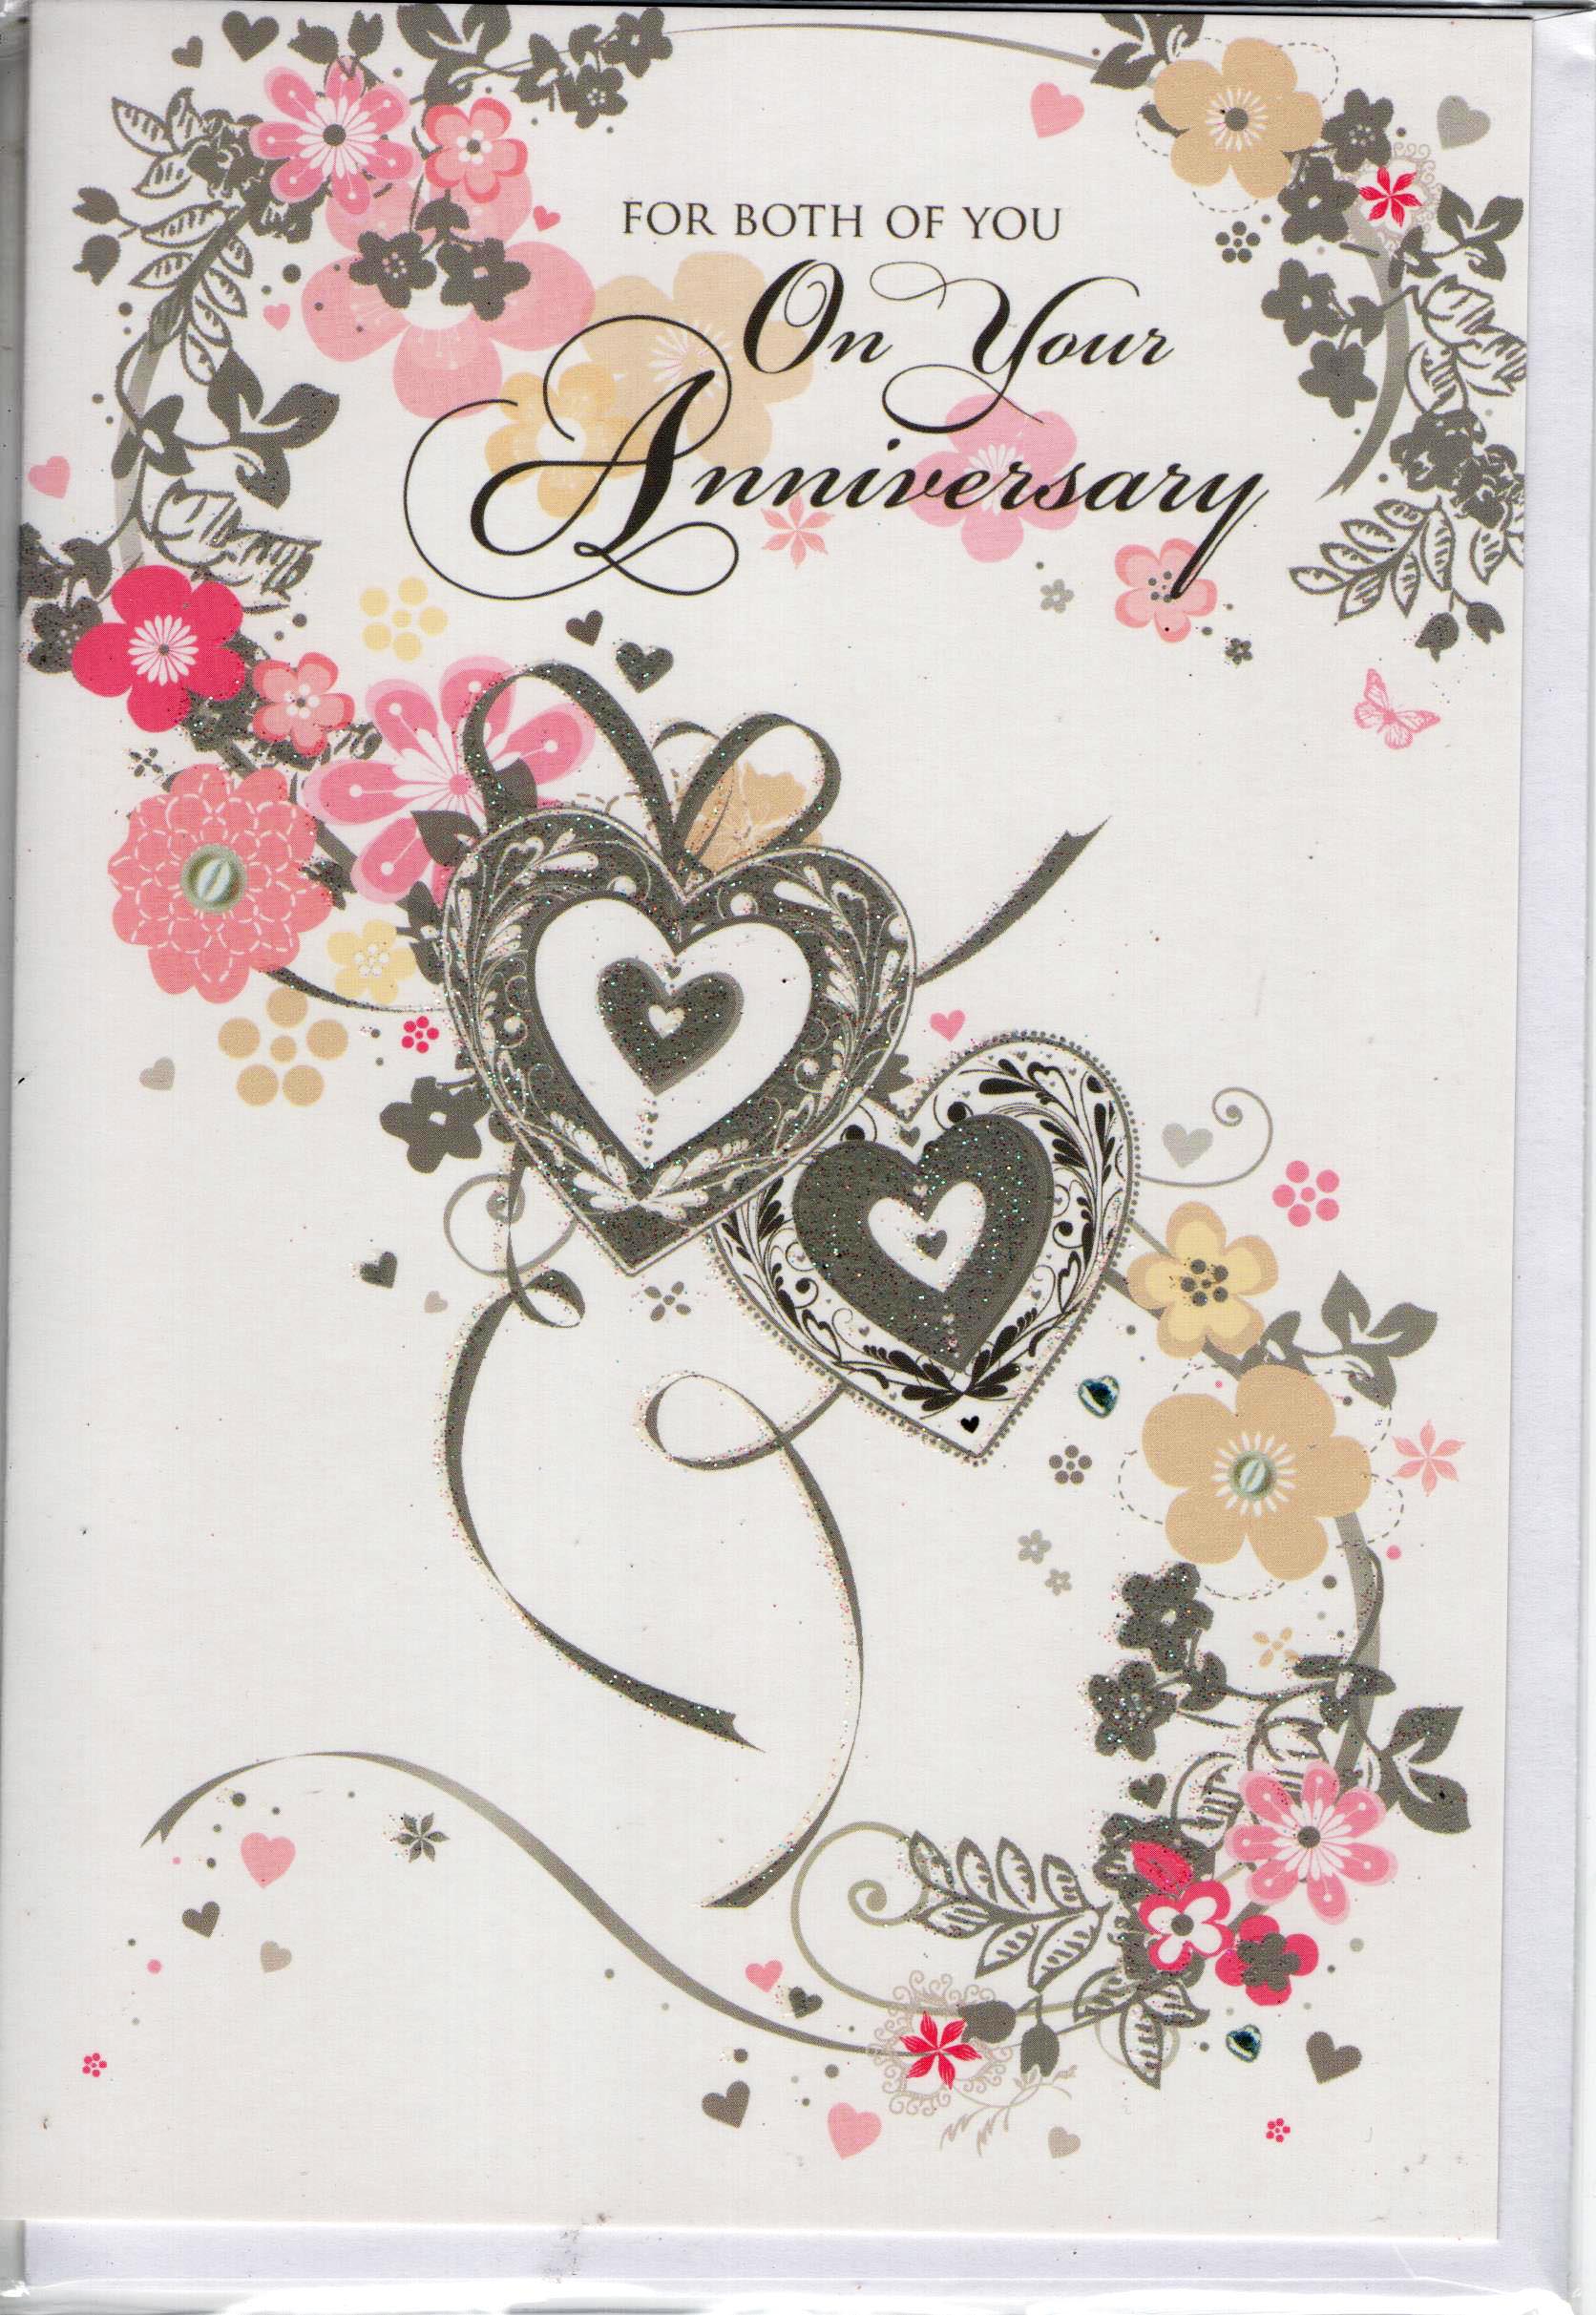 For Both of You on Your Anniversary - Greeting Card